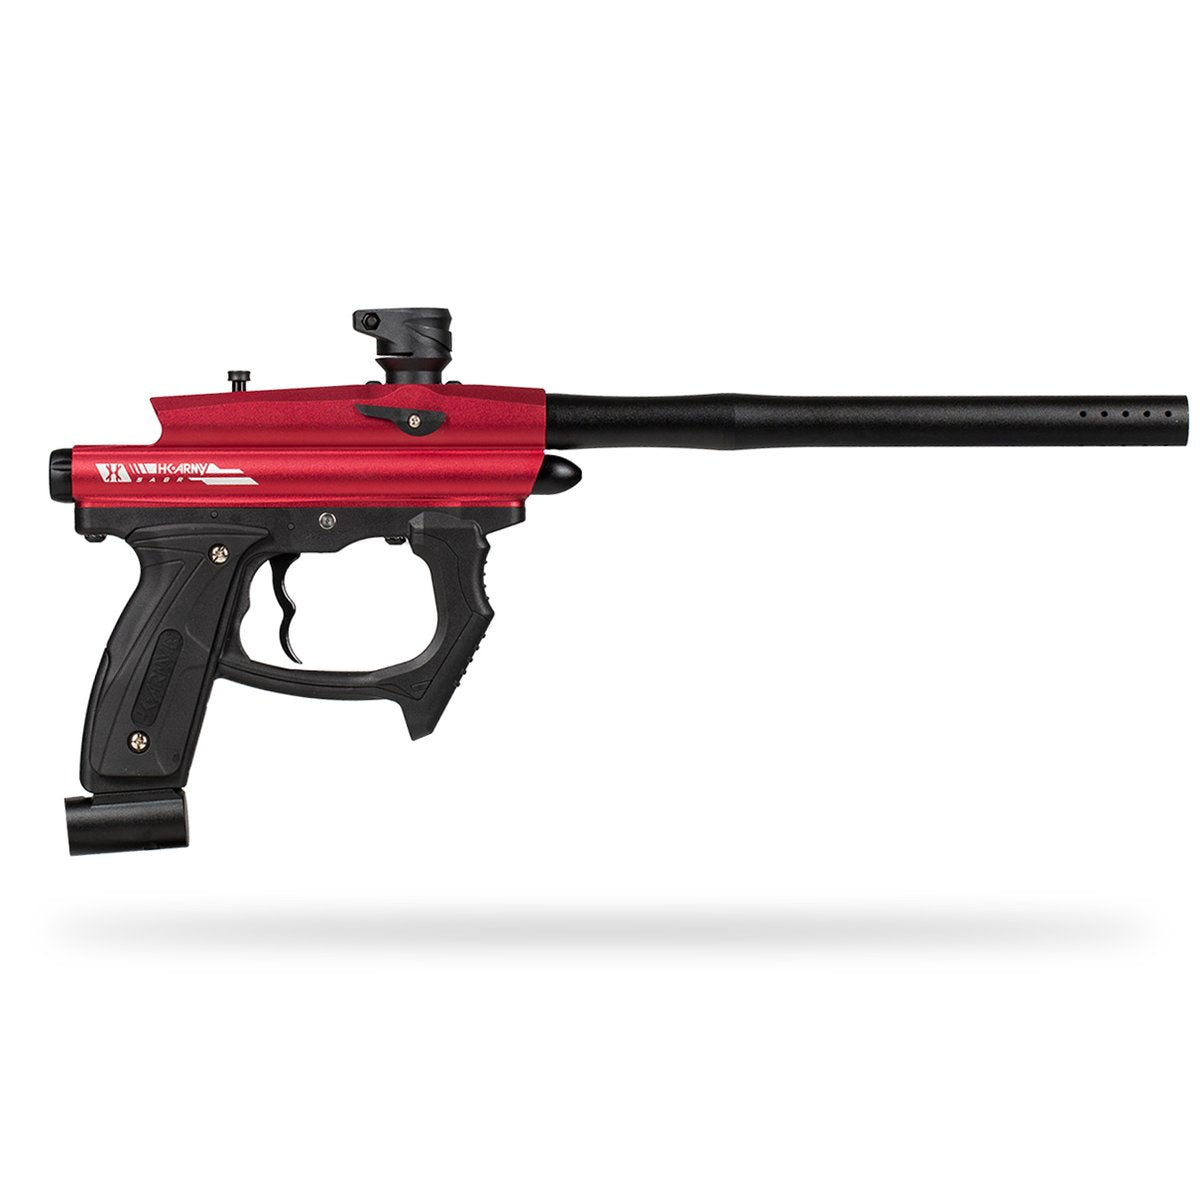 SABR - Dust Red / Black - Eminent Paintball And Airsoft